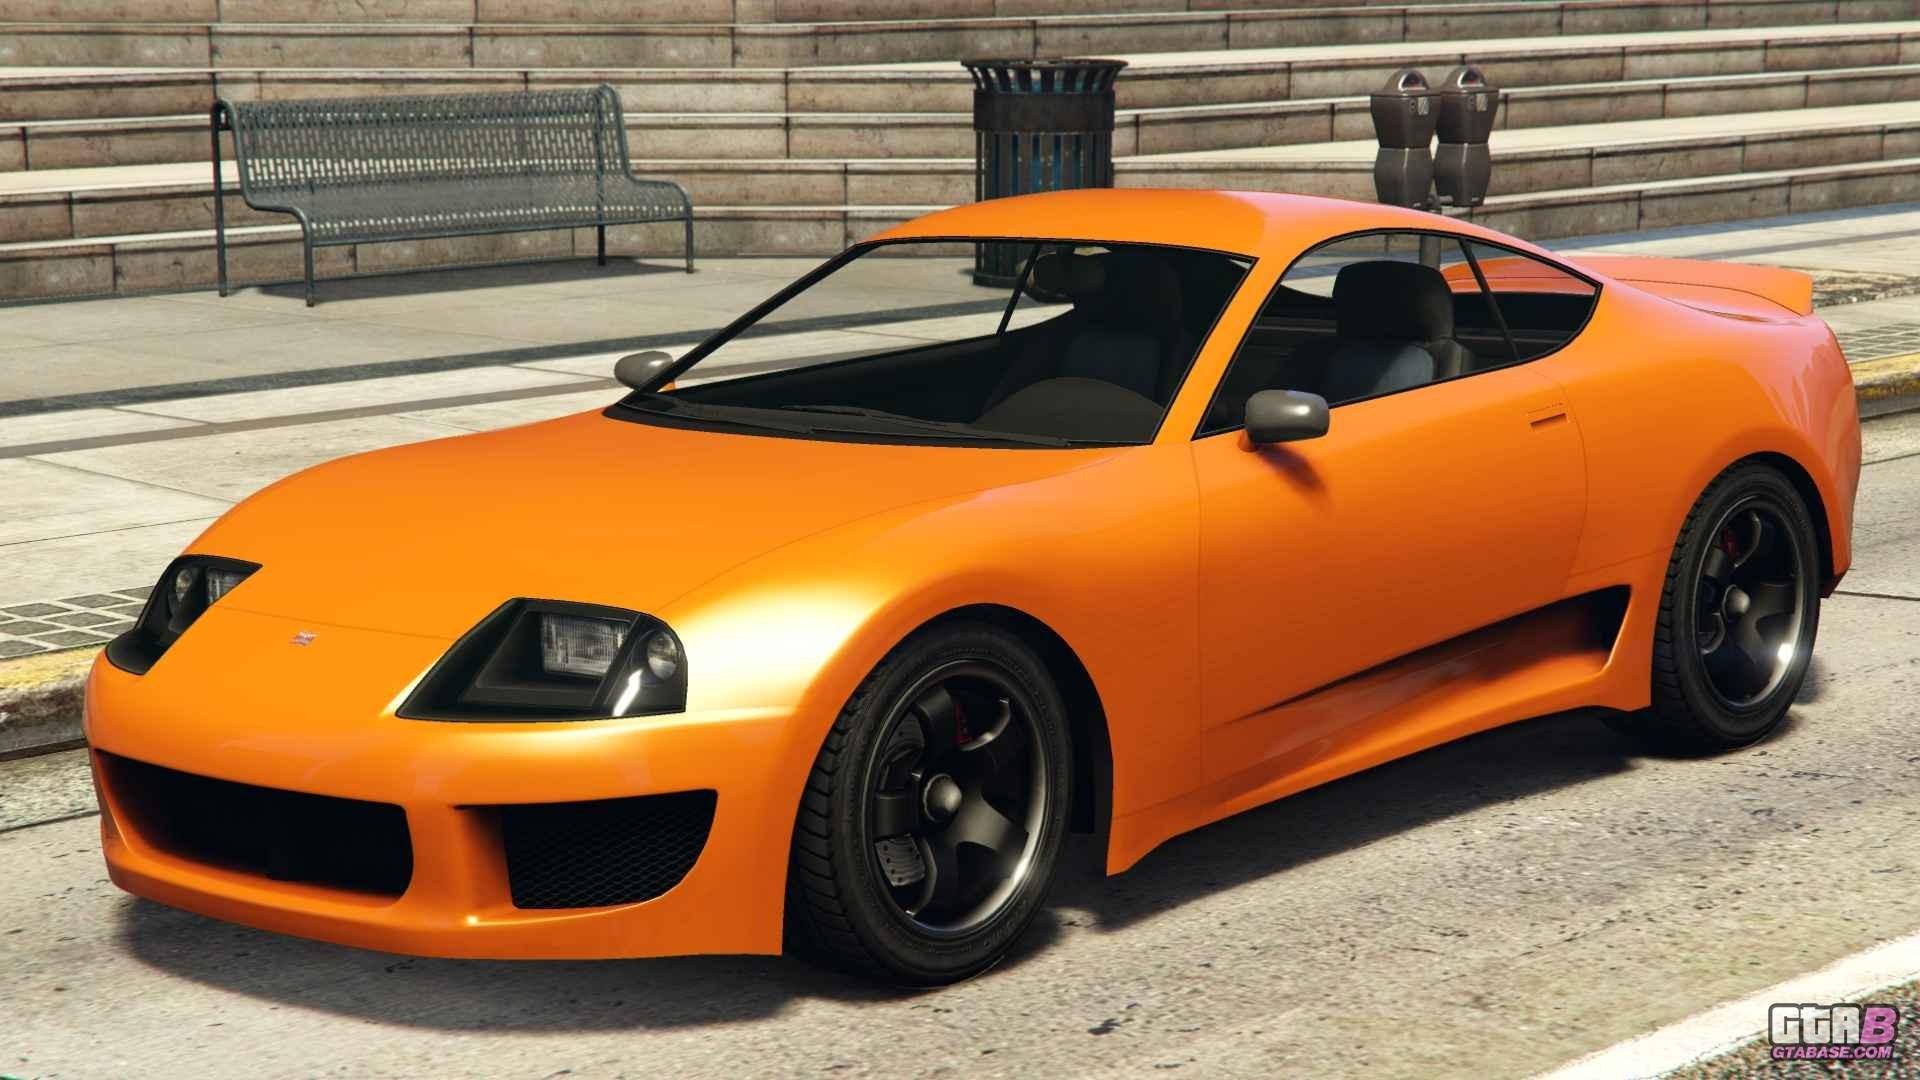 Dinka Jester Classic  GTA 5 Online Vehicle Stats, Price, How To Get